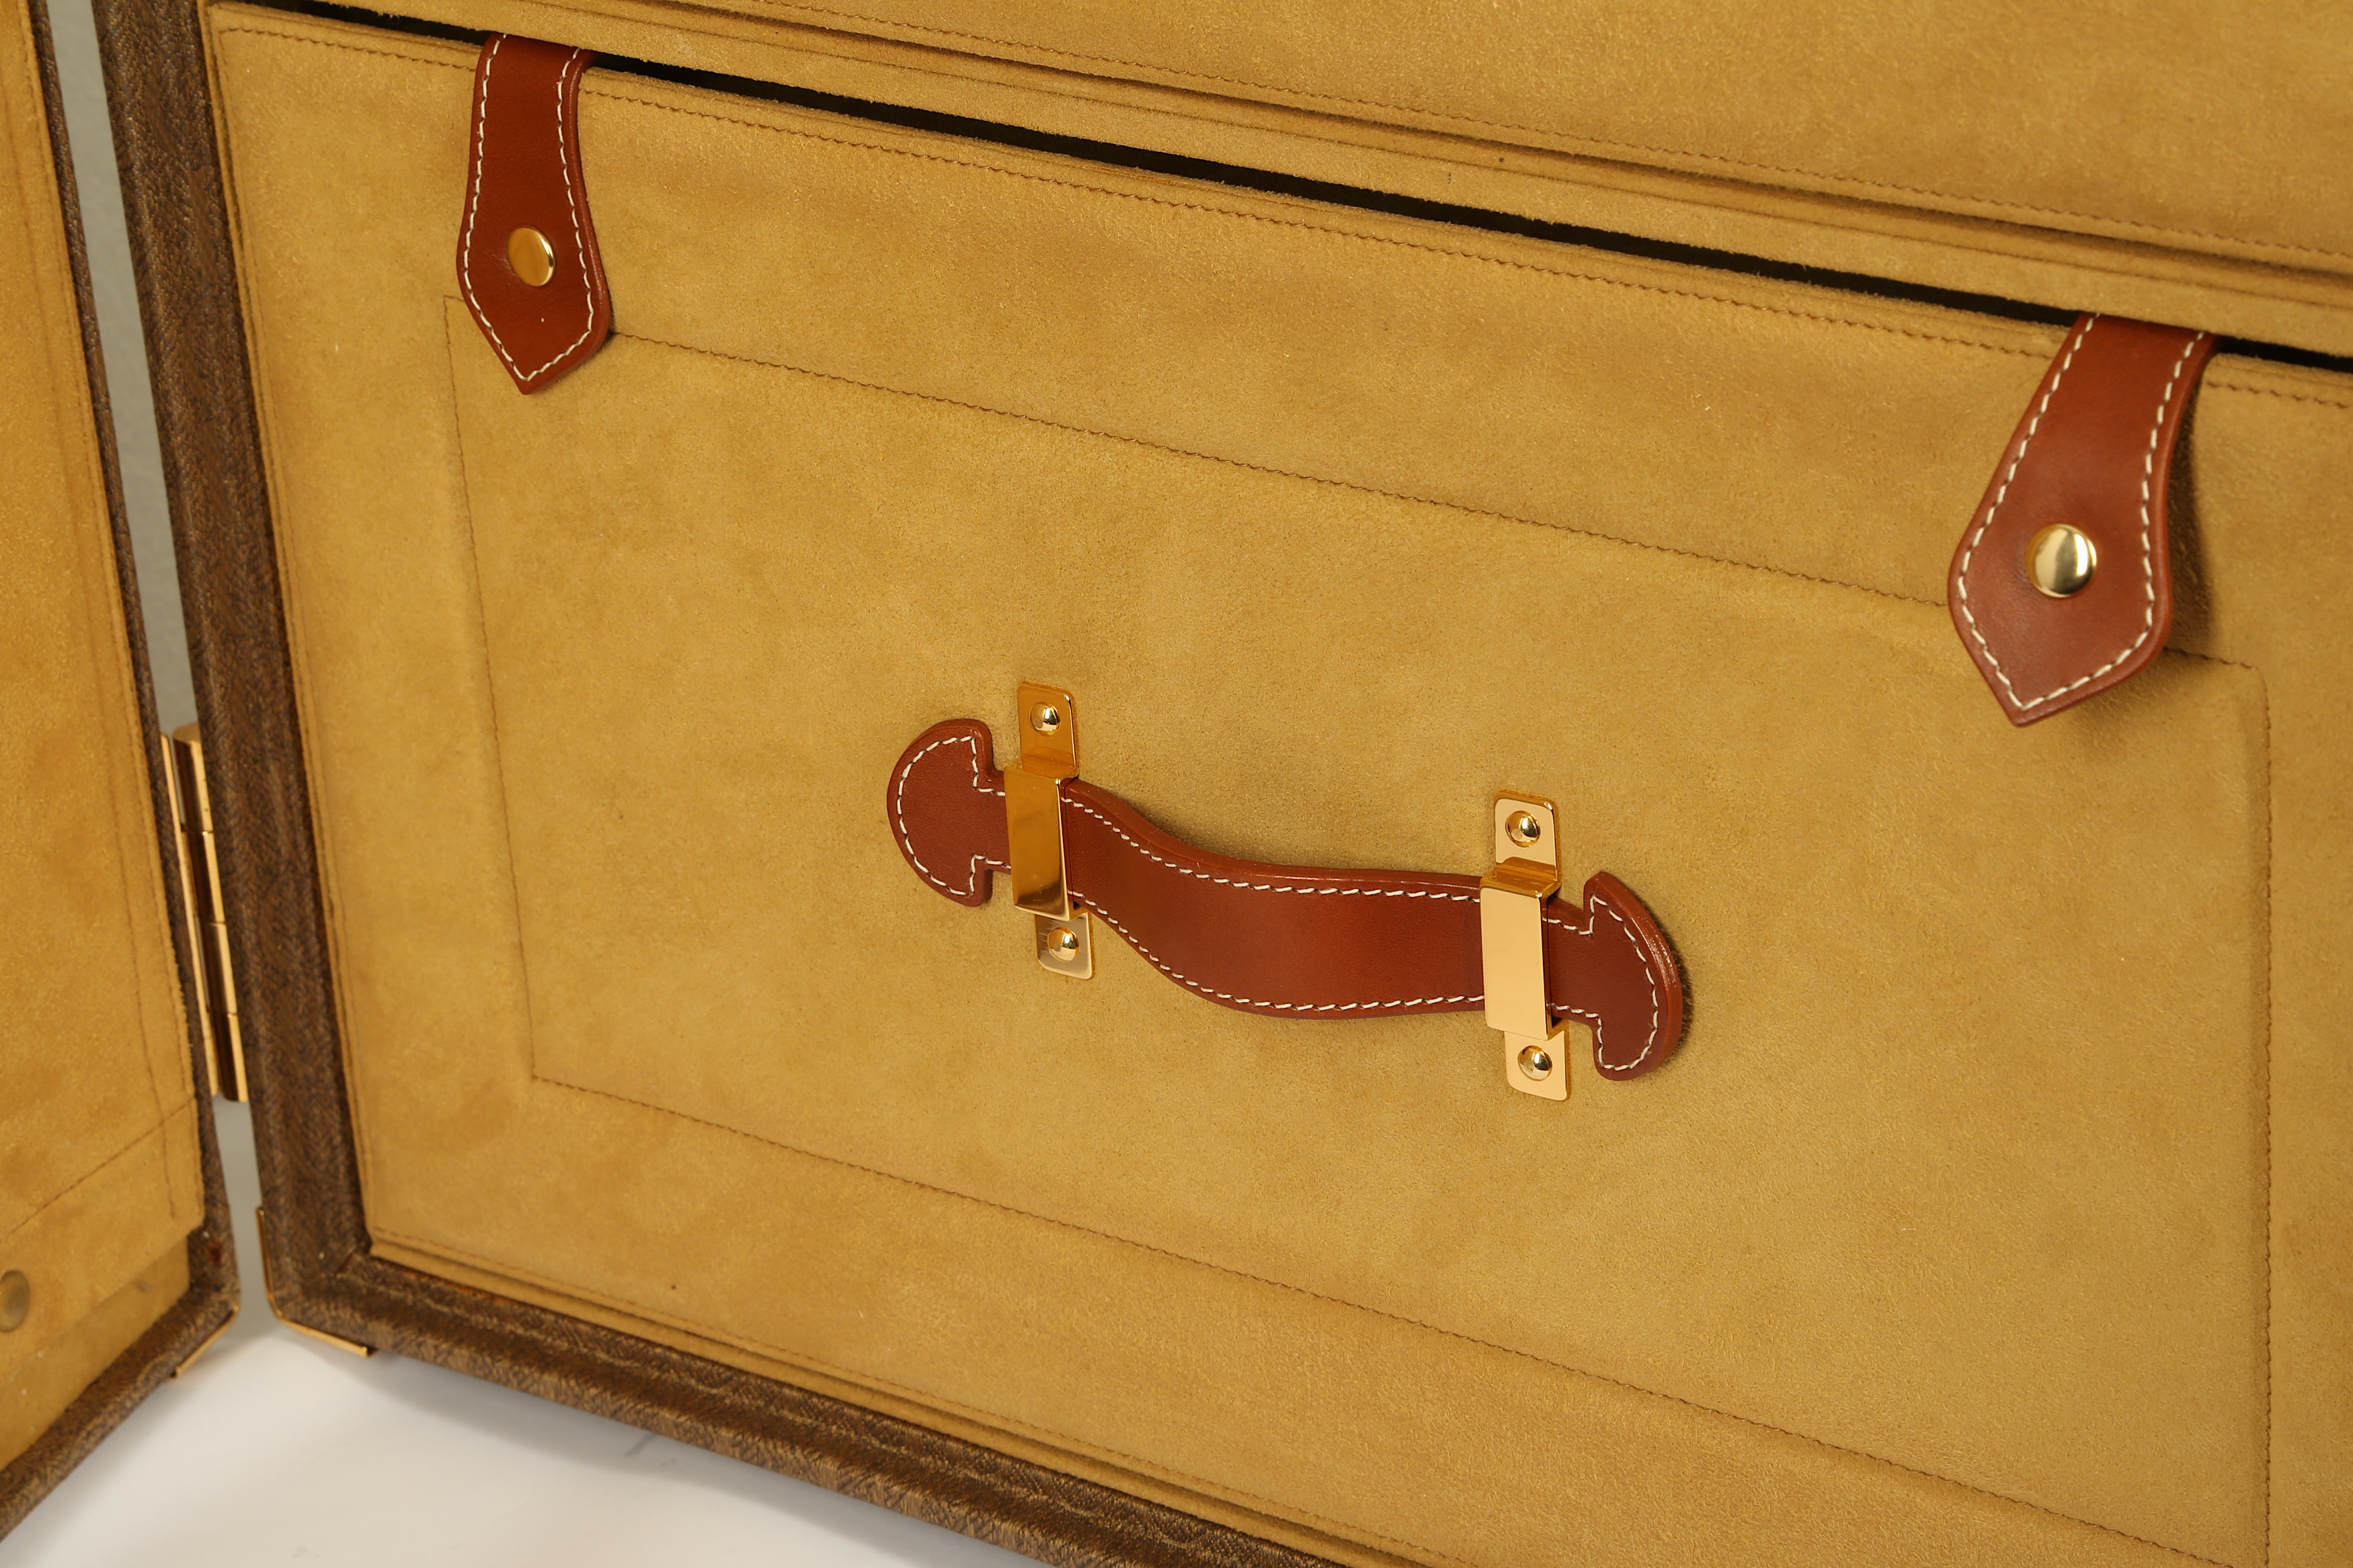 A GUCCI VINTAGE ROLLING STEAMER TRUNK - Image 14 of 14